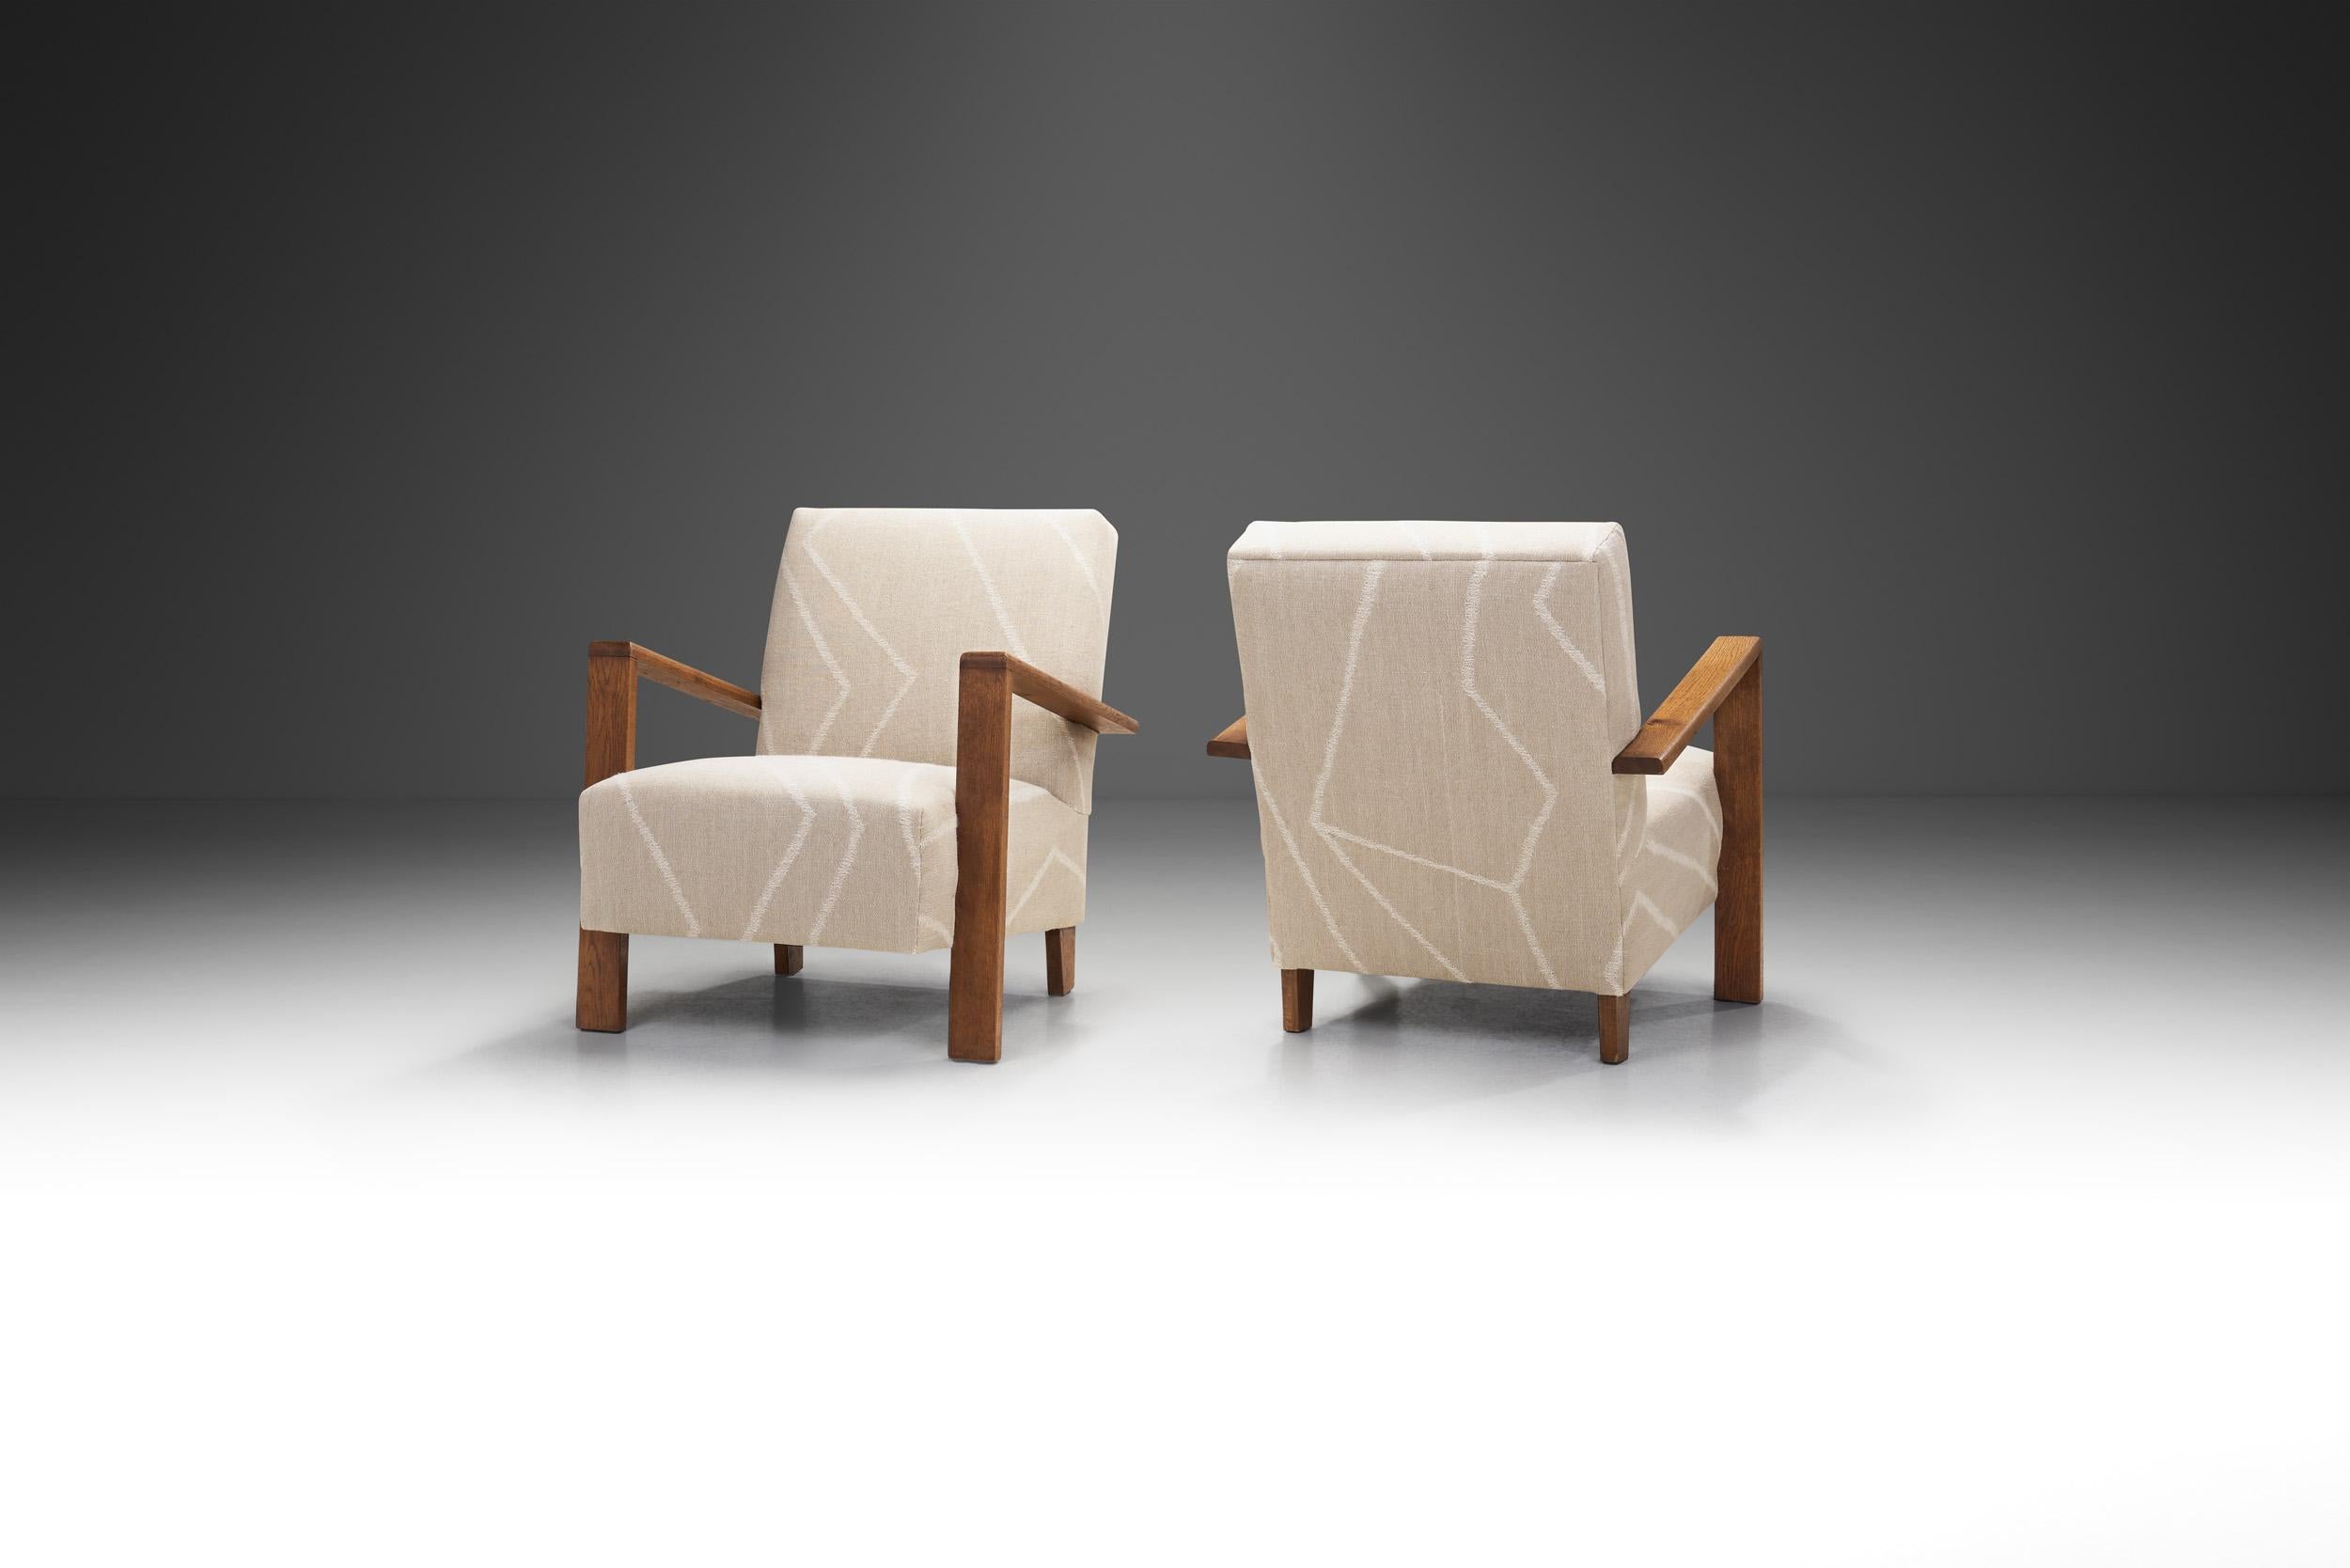 Dutch A Pair of Haagse School Art Deco Lounge Chairs, The Netherlands 1930s For Sale